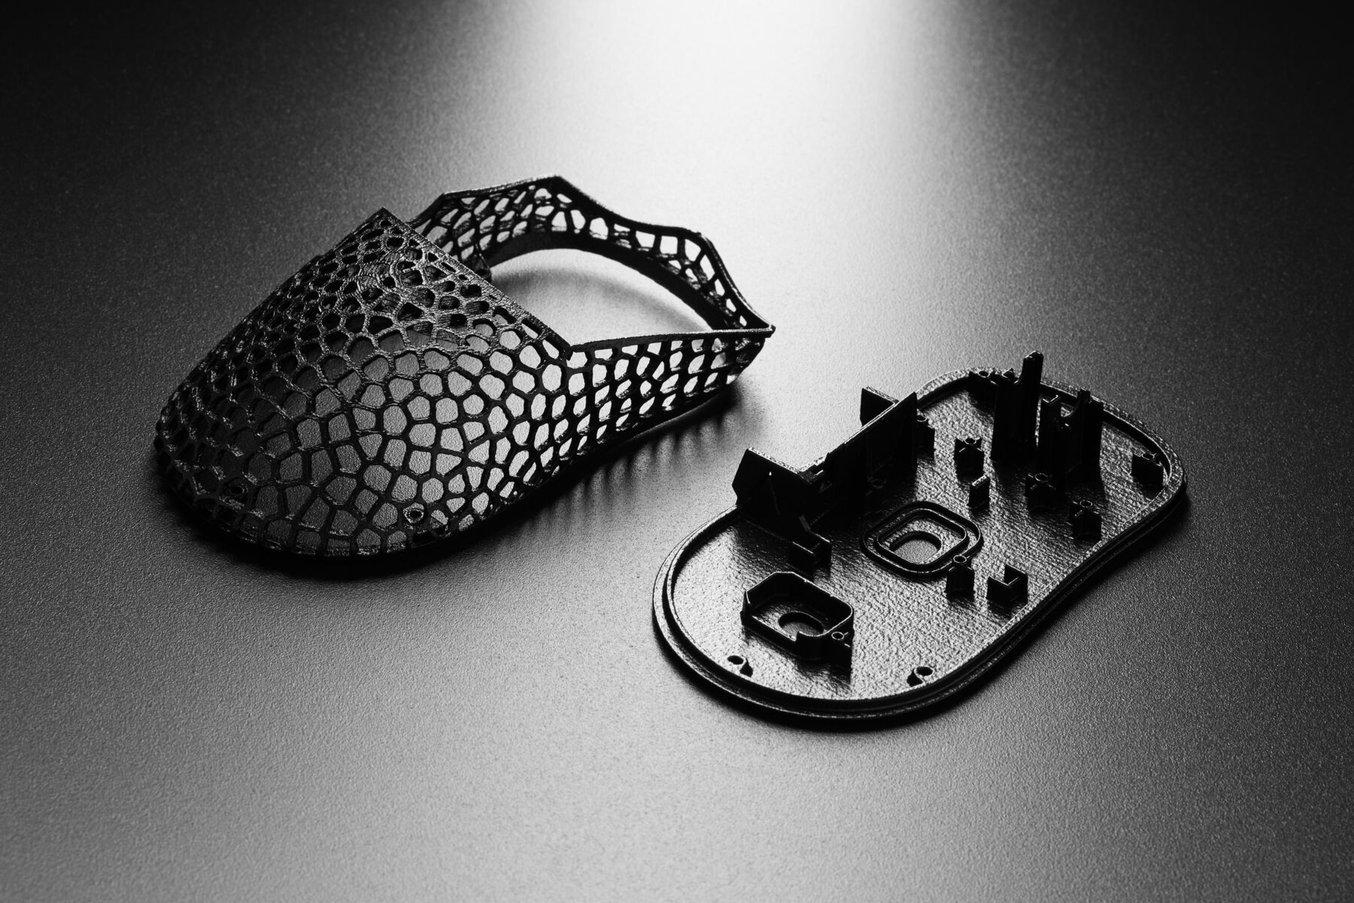 vapor smoothed SLS 3D printed computer mouse